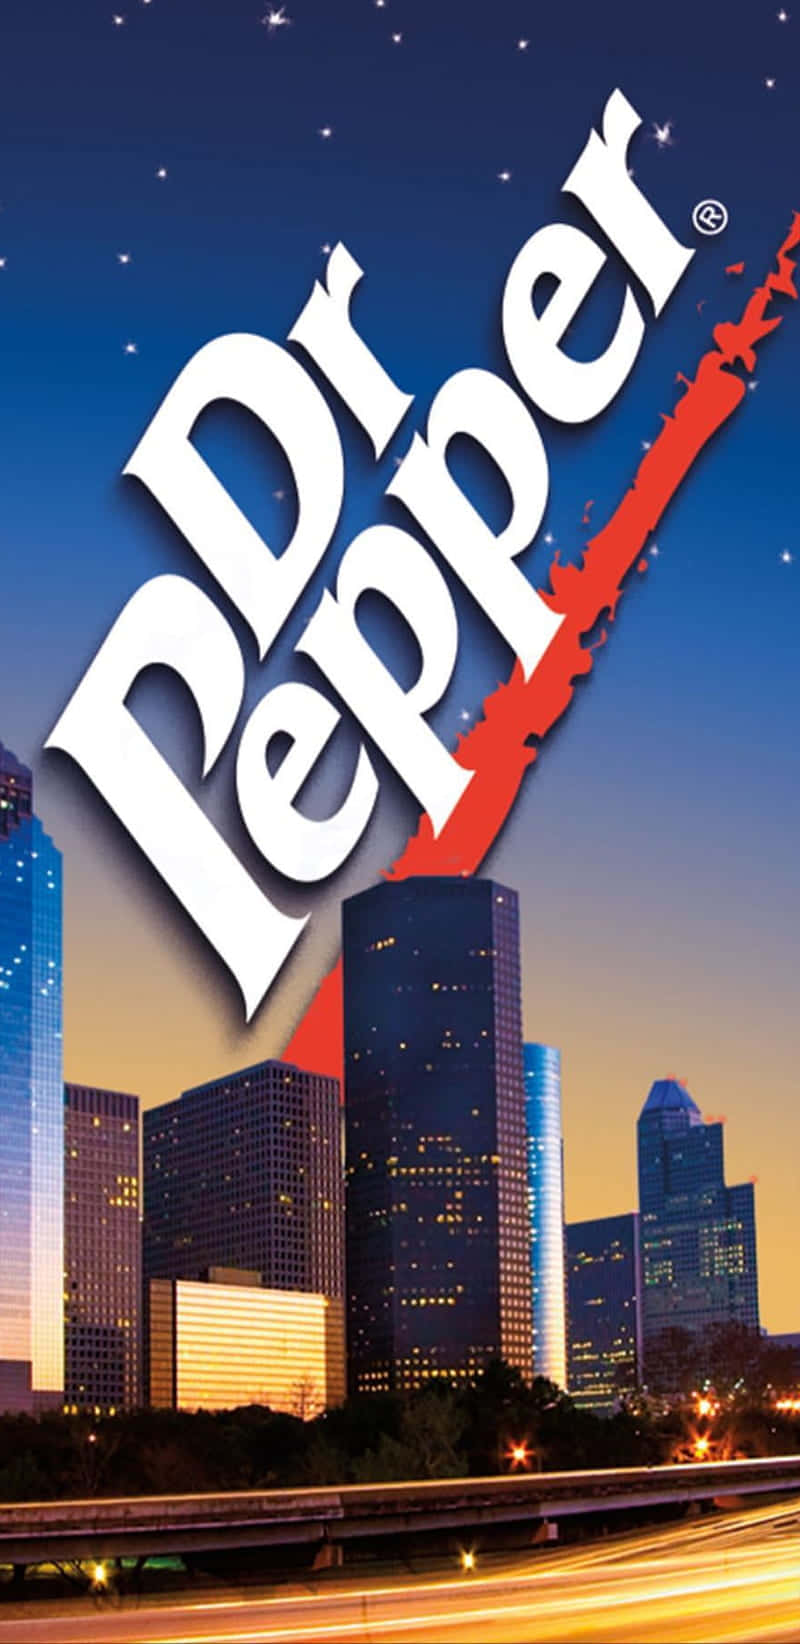 Dr Pepper Logo With A City Skyline Wallpaper